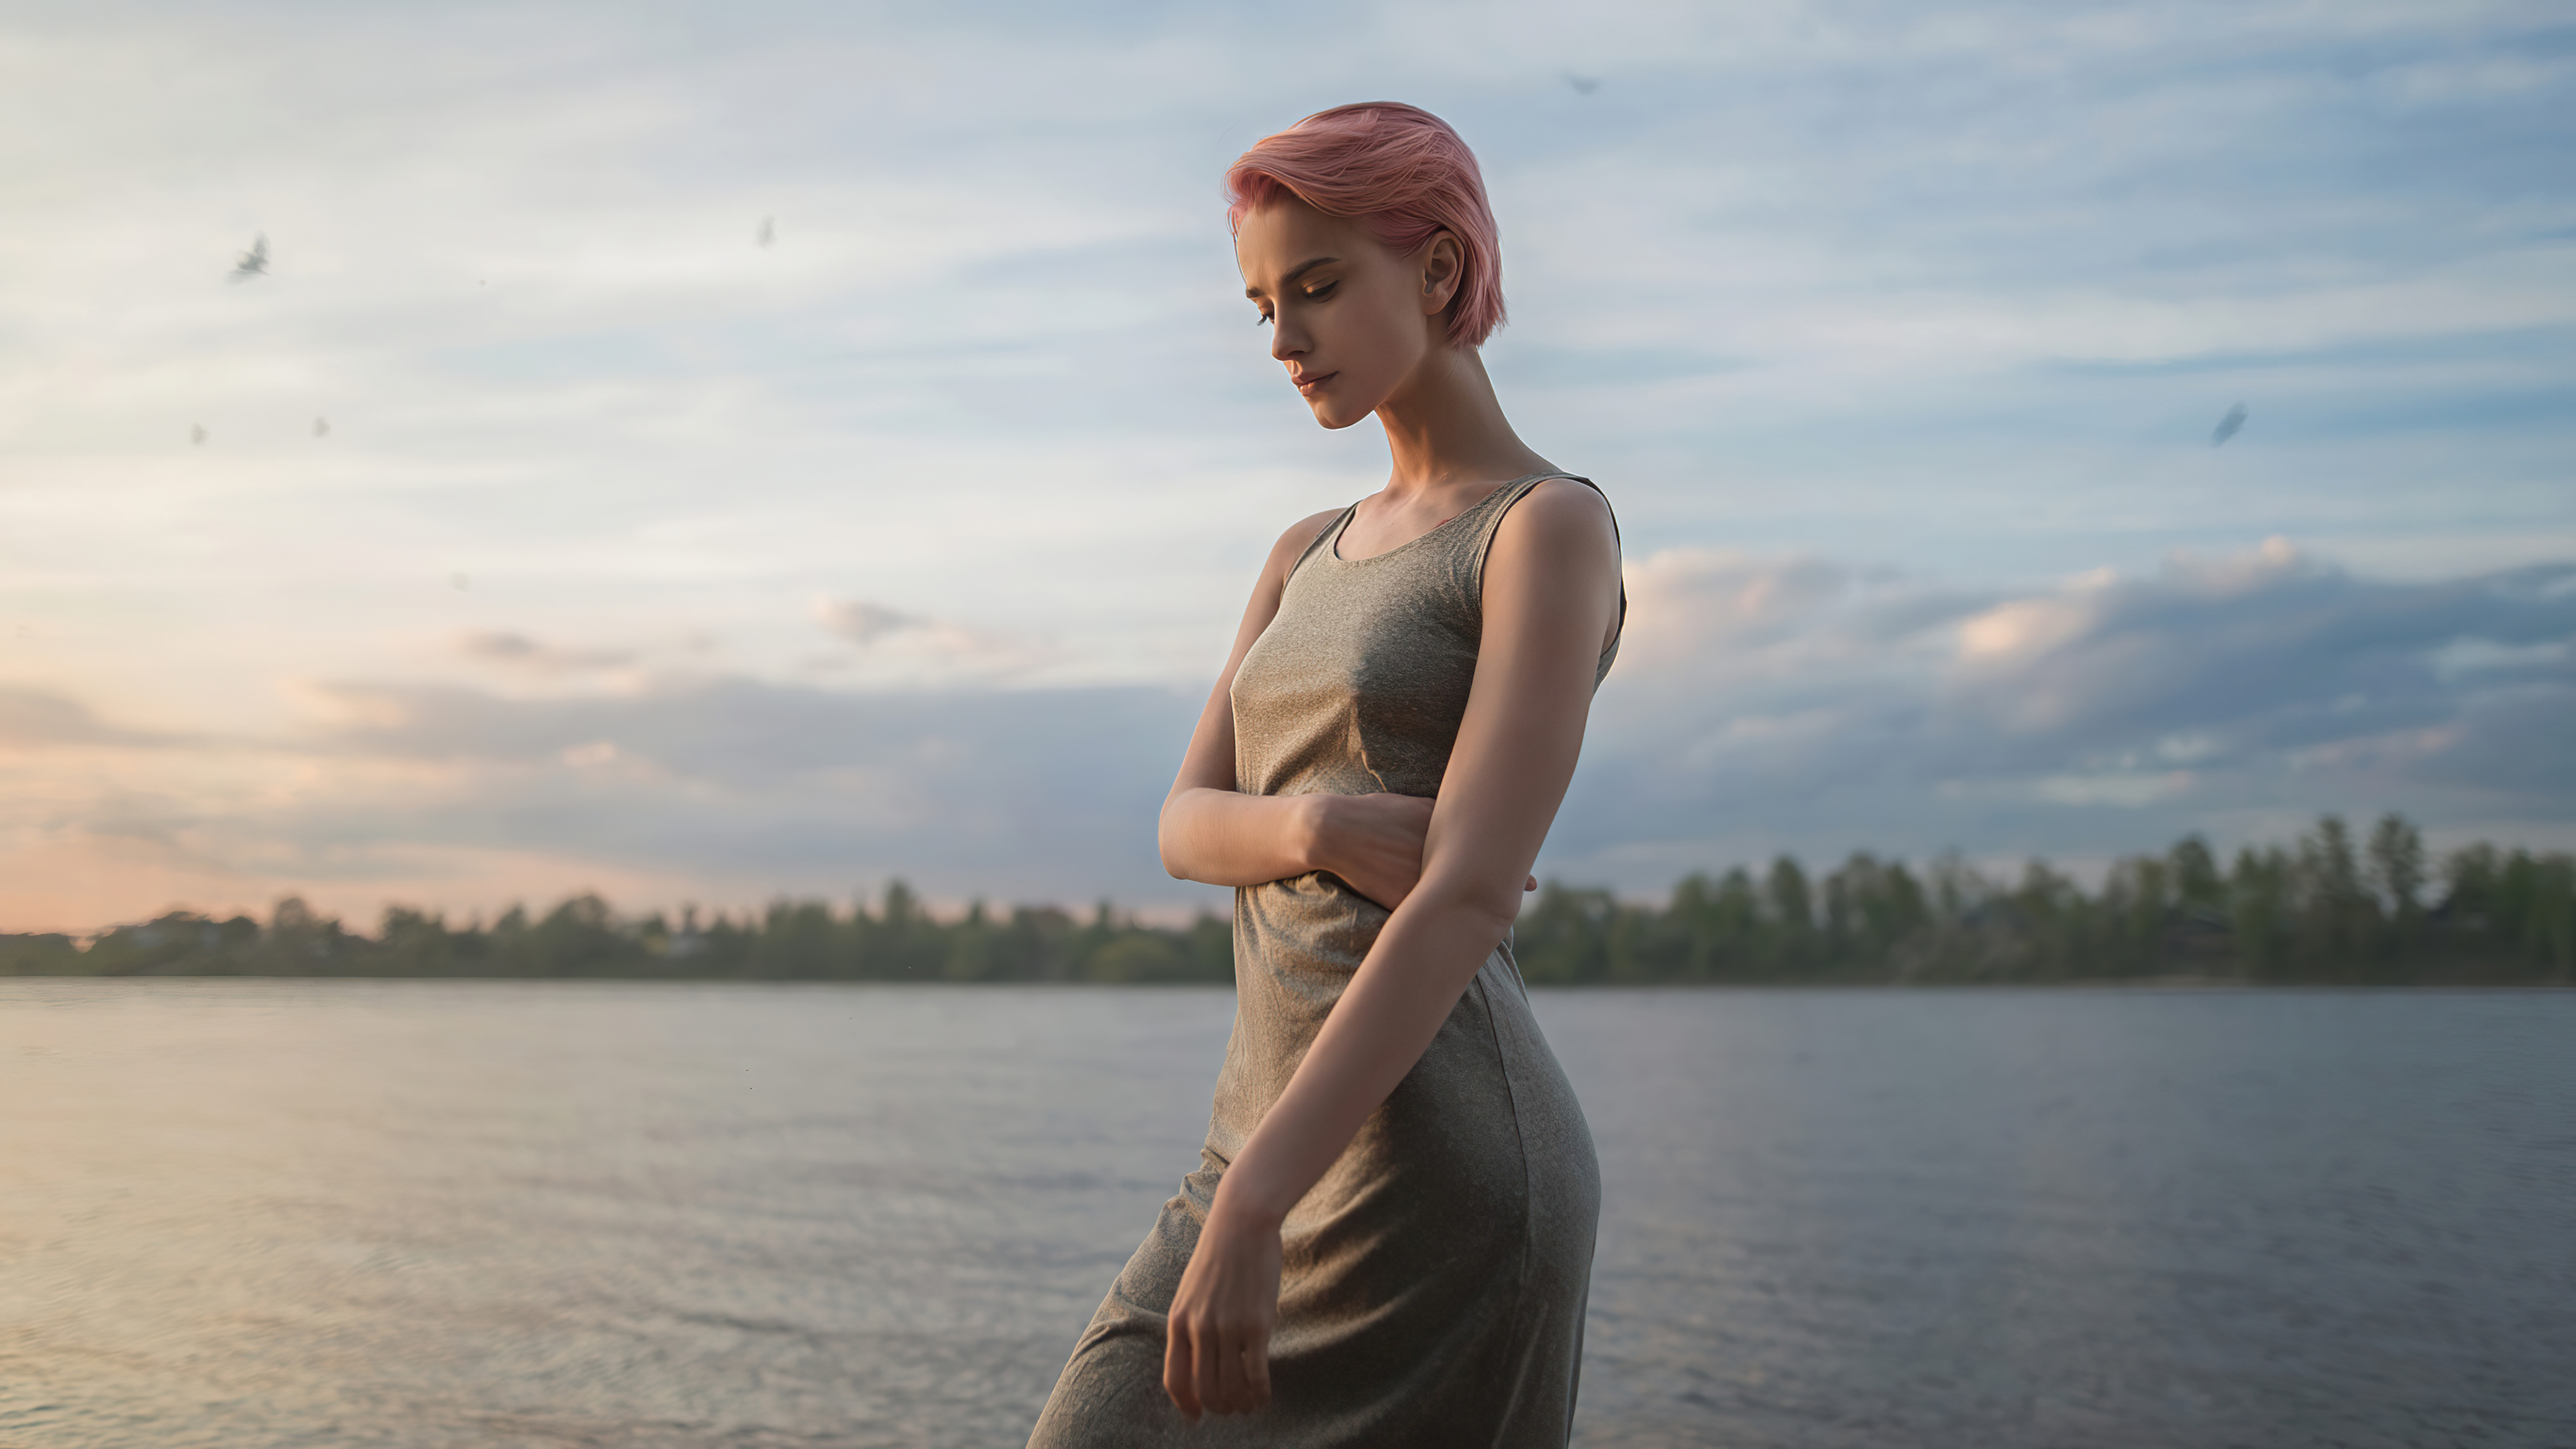 The girl with pink hair on the lake